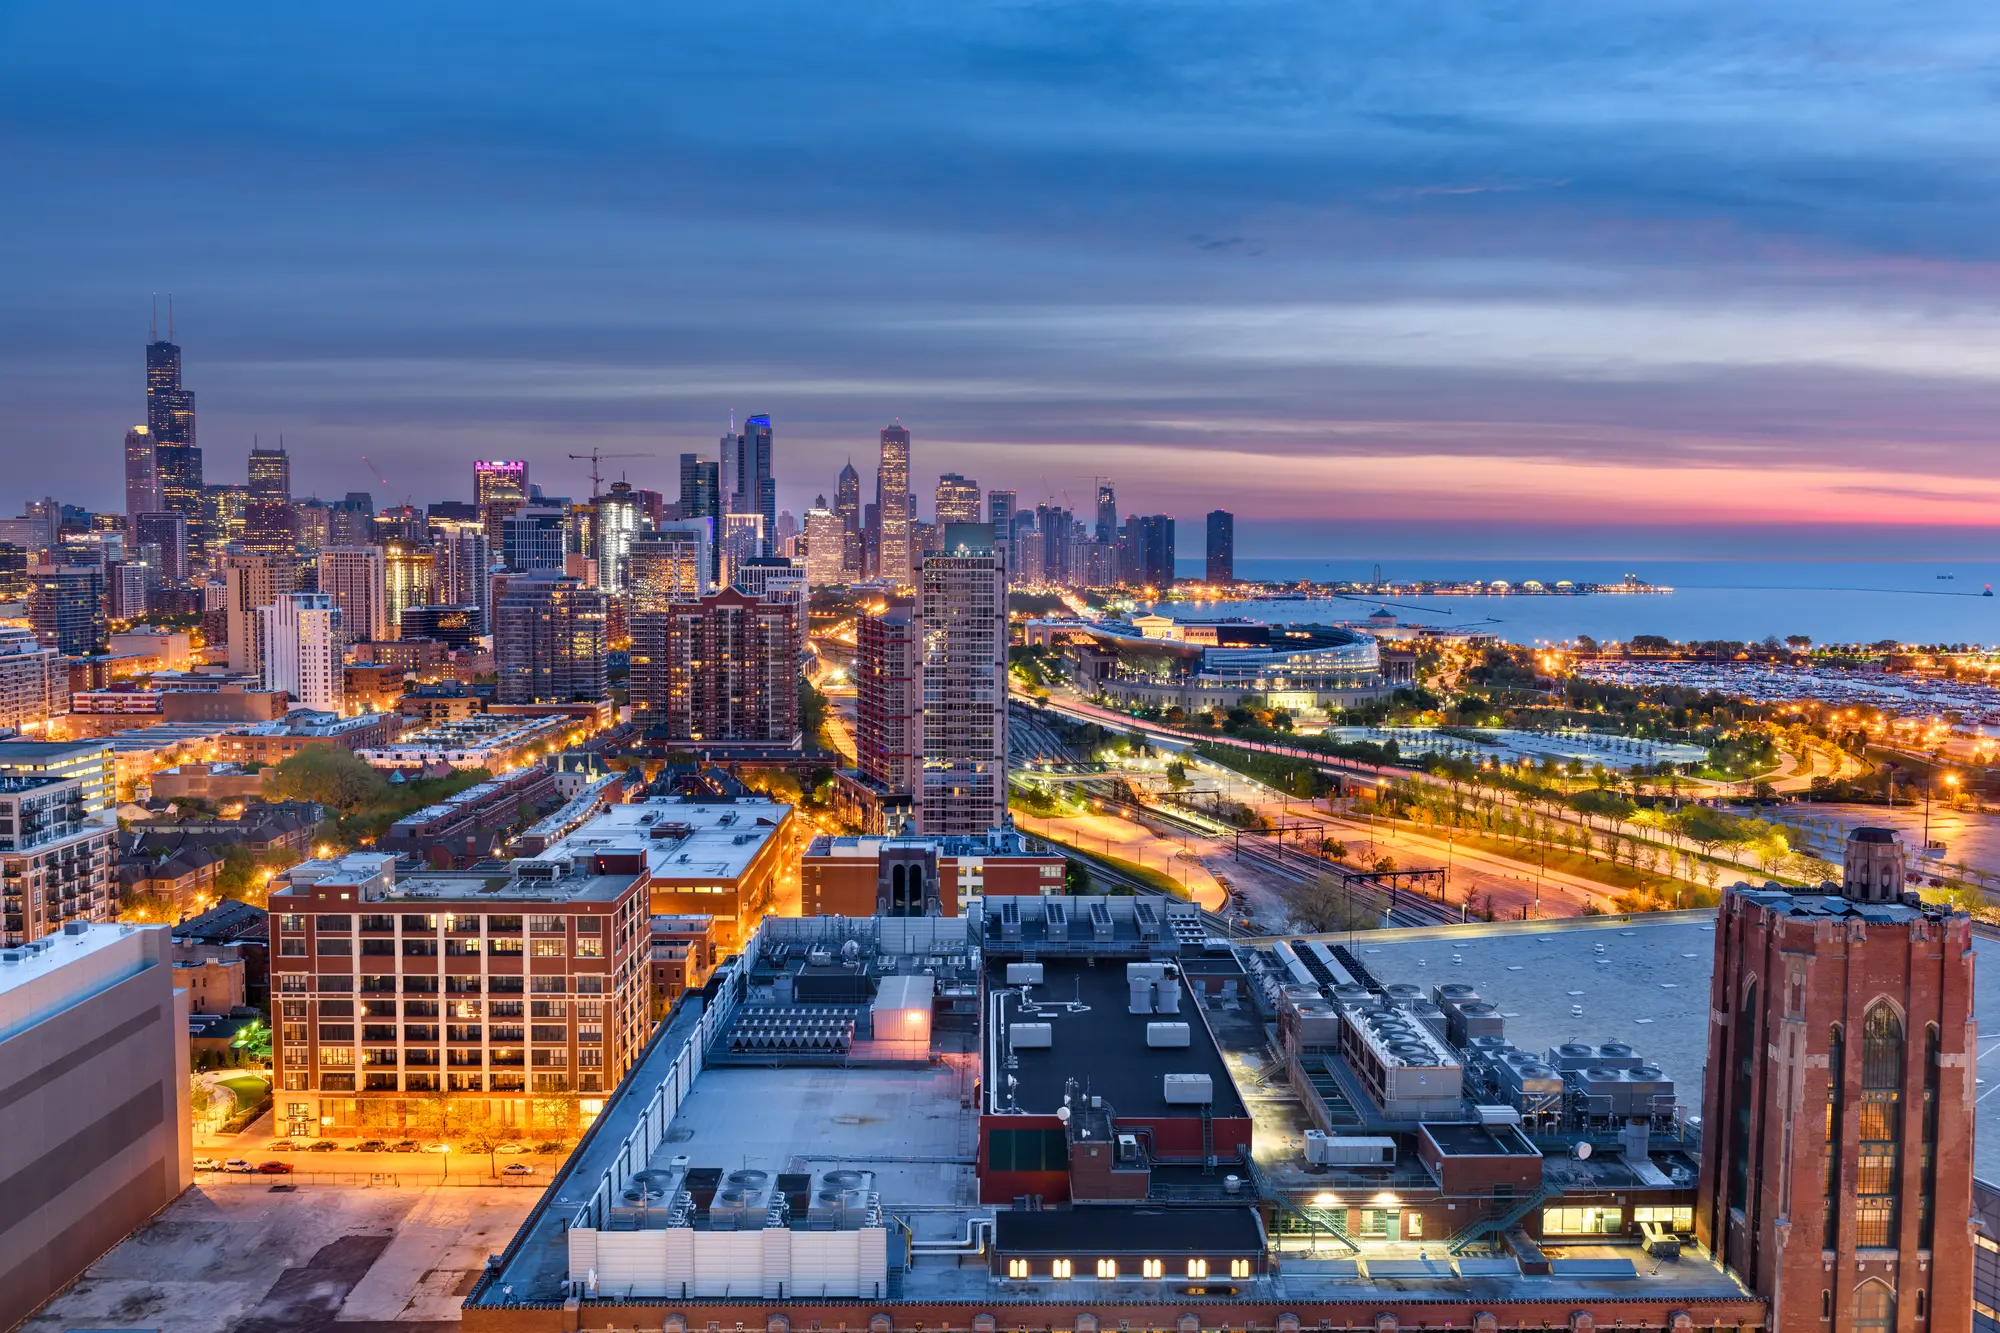 Aerial view of the skyscrapers of Downtown, one of the best areas to stay in Chicago, and the harbor lit up at dusk.